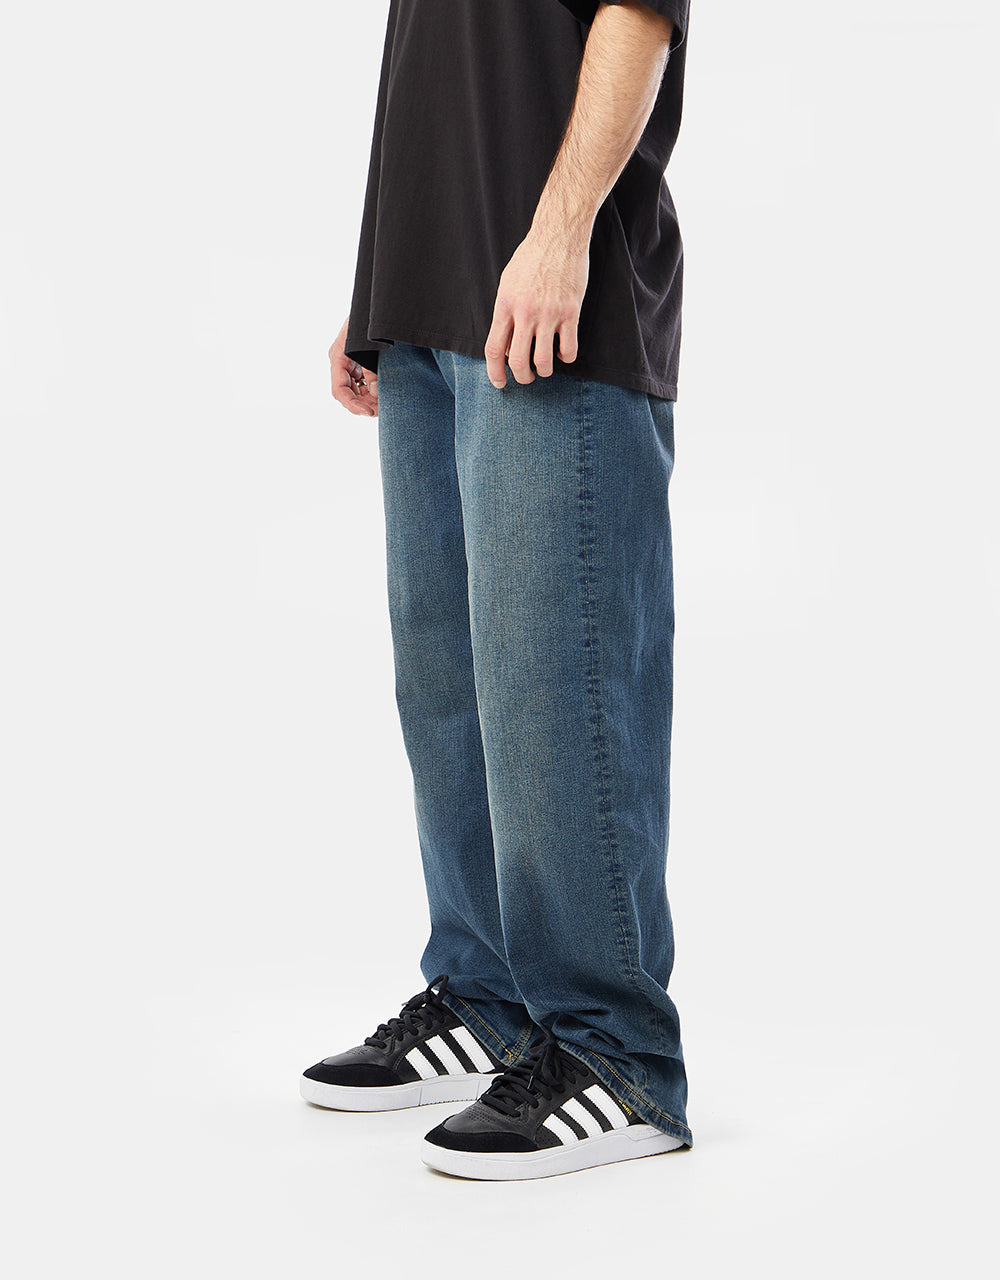 Route One Baggy Denim Jeans - Mid Wash